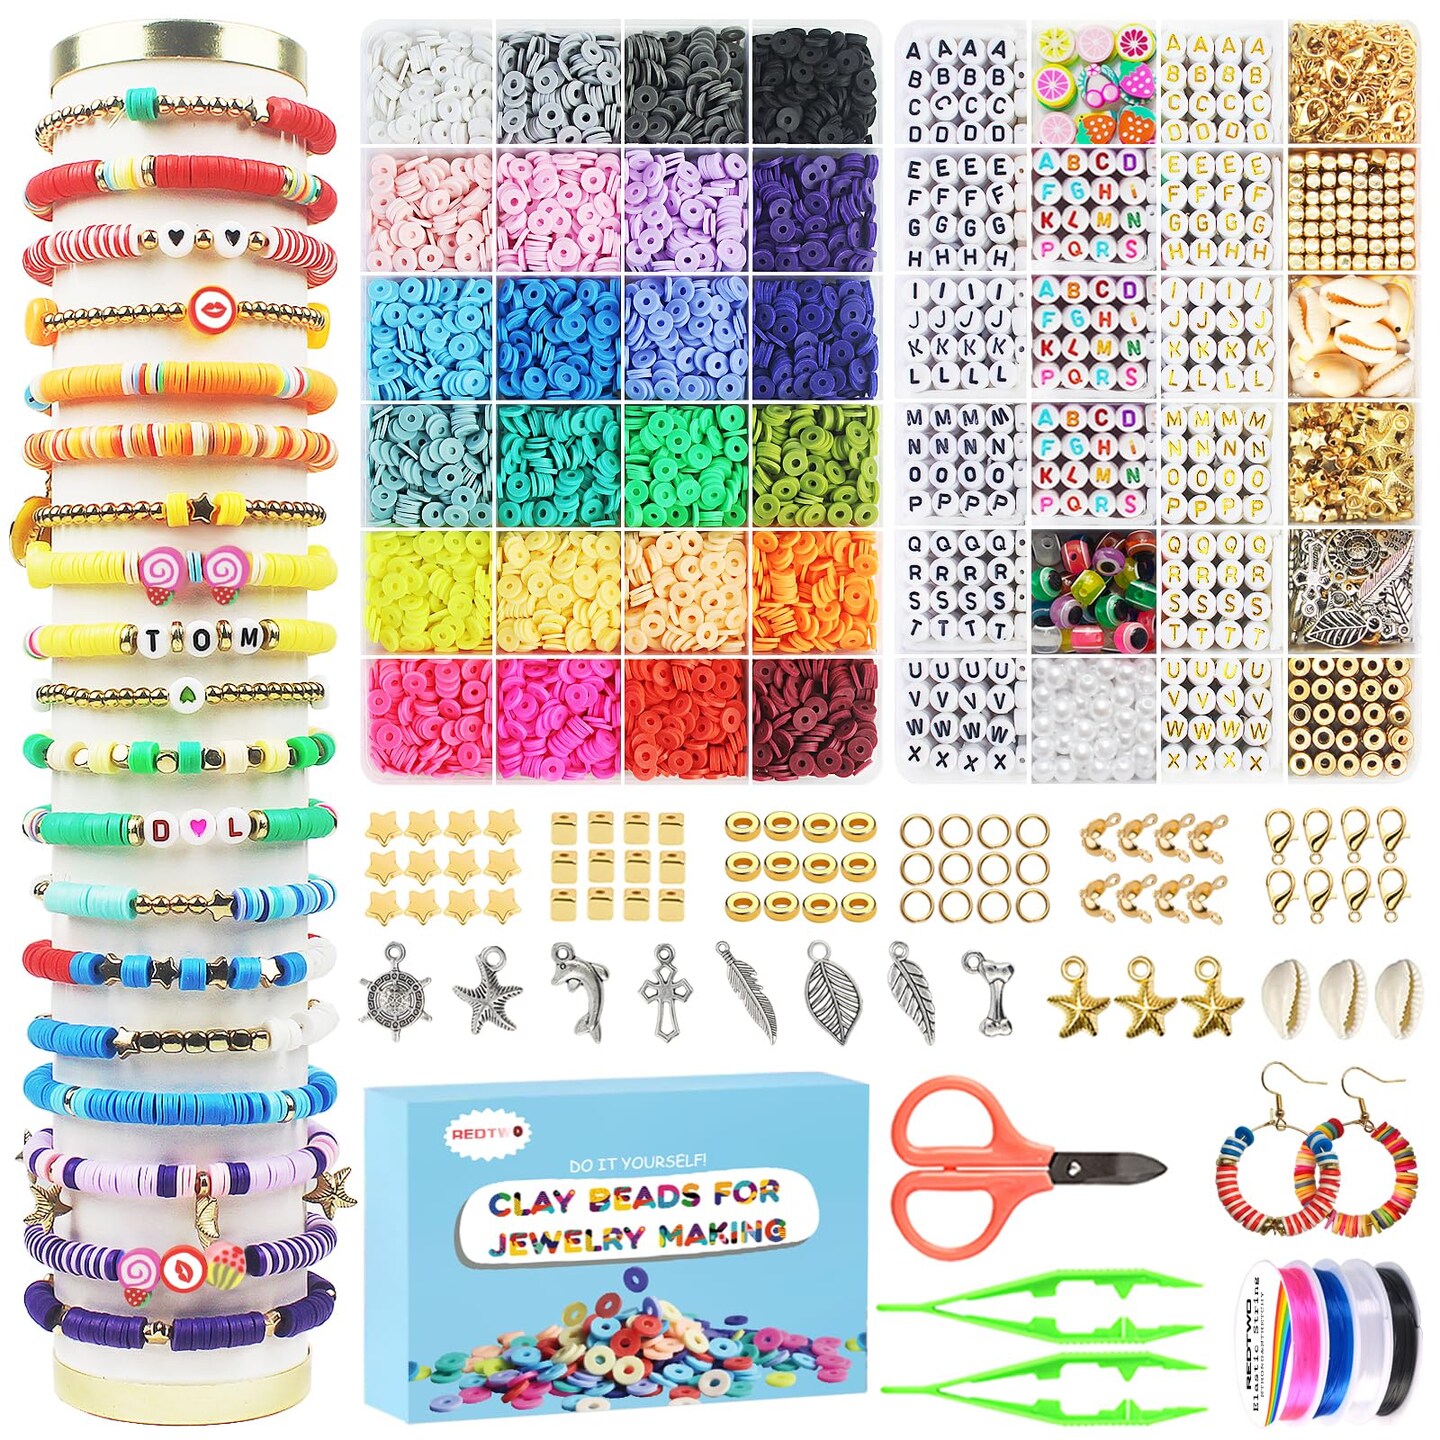 12220pcs Clay Beads Clay Bead Bracelet Kit, 96 Colors Beads 6mm Flat Round  Clay Heishi Beads for Bracelerts with Letter Beads Charm and Elastic  Strings Friendship Bracelet Making Kit for Girls | Michaels